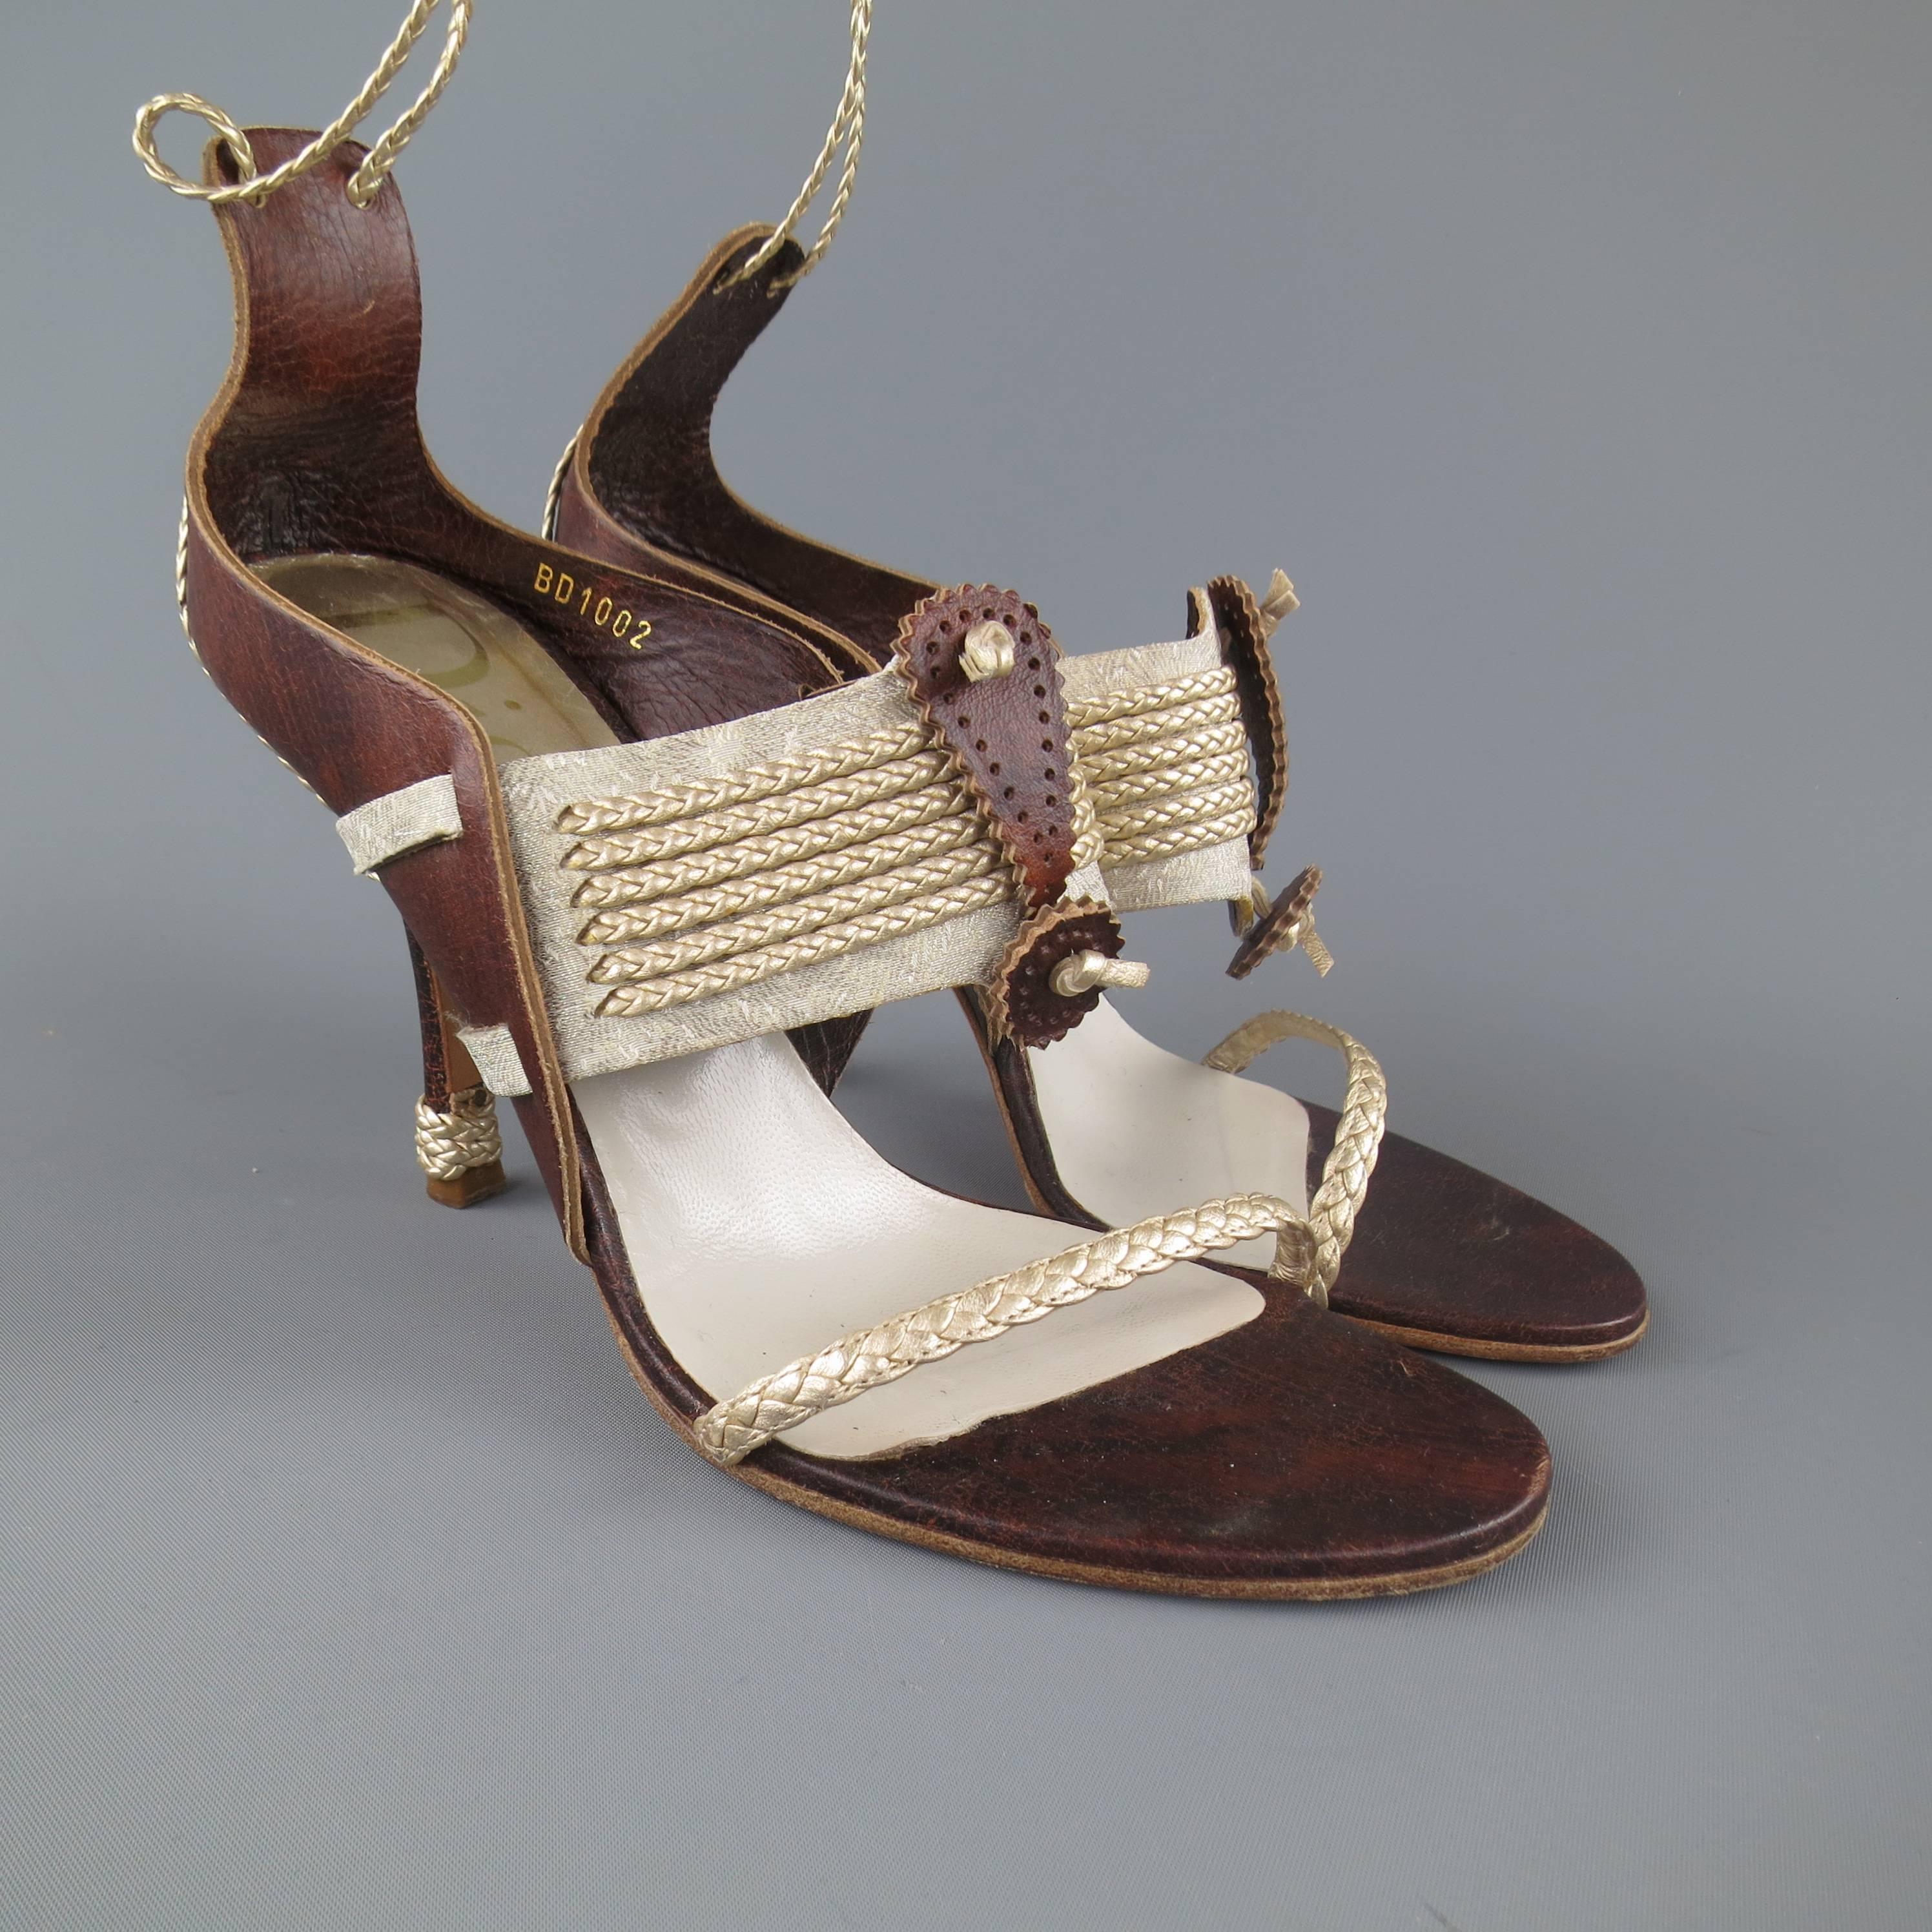 Women's CHRISTIAN DIOR Size 7.5 Brown & Silver Leather Ankle Strap Sandals